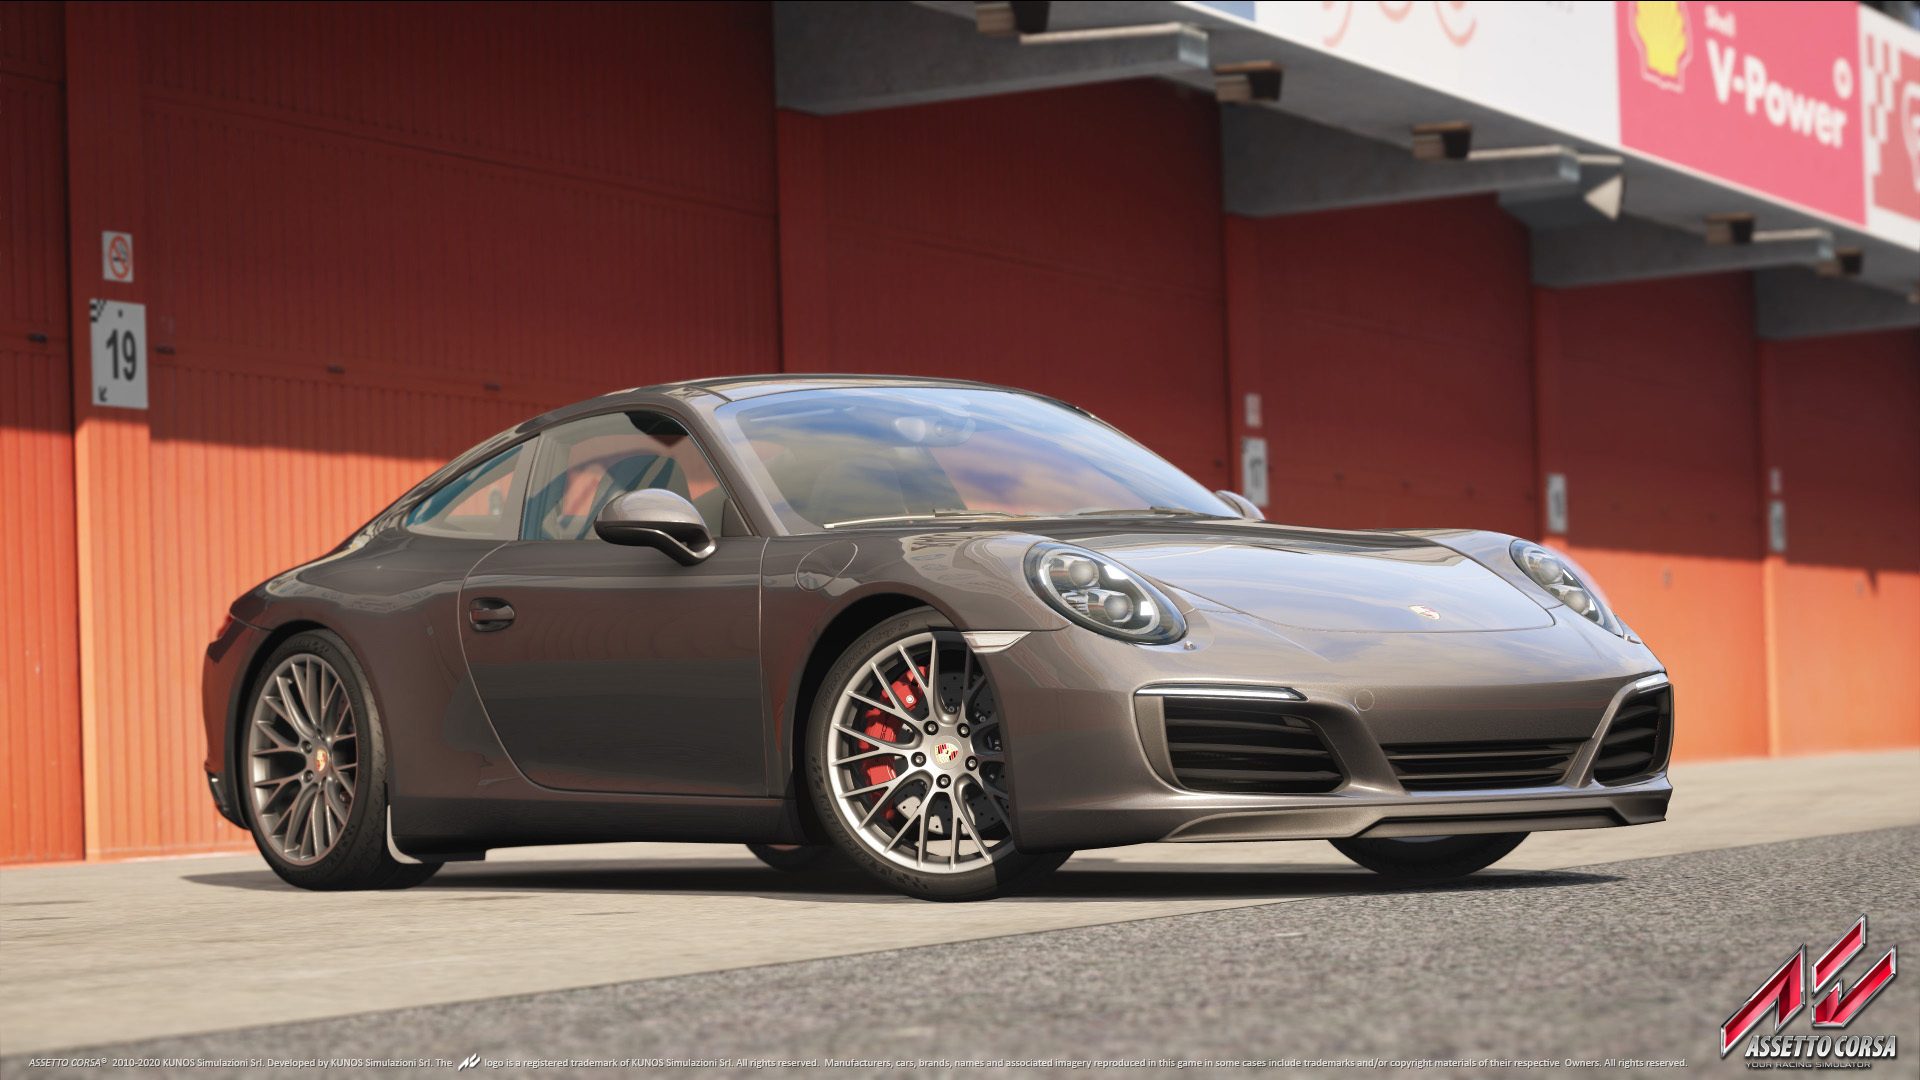 Forza Motorsport 6 Porsche Expansion releasing in March according to   - Team VVV